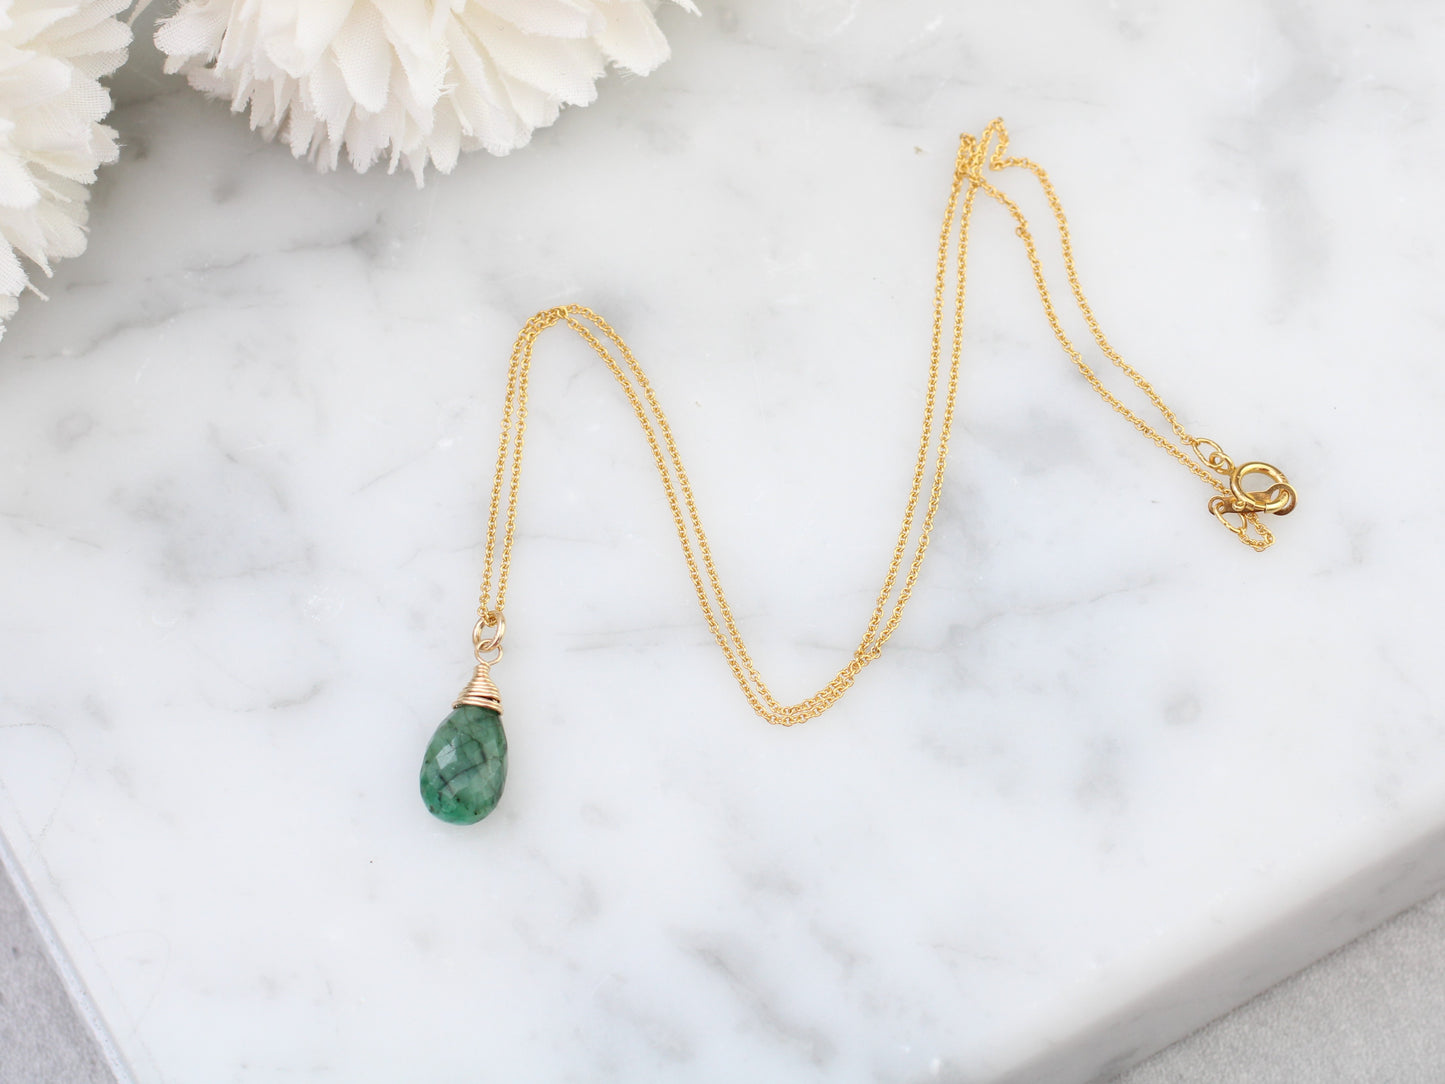 Emerald necklace in silver or gold.